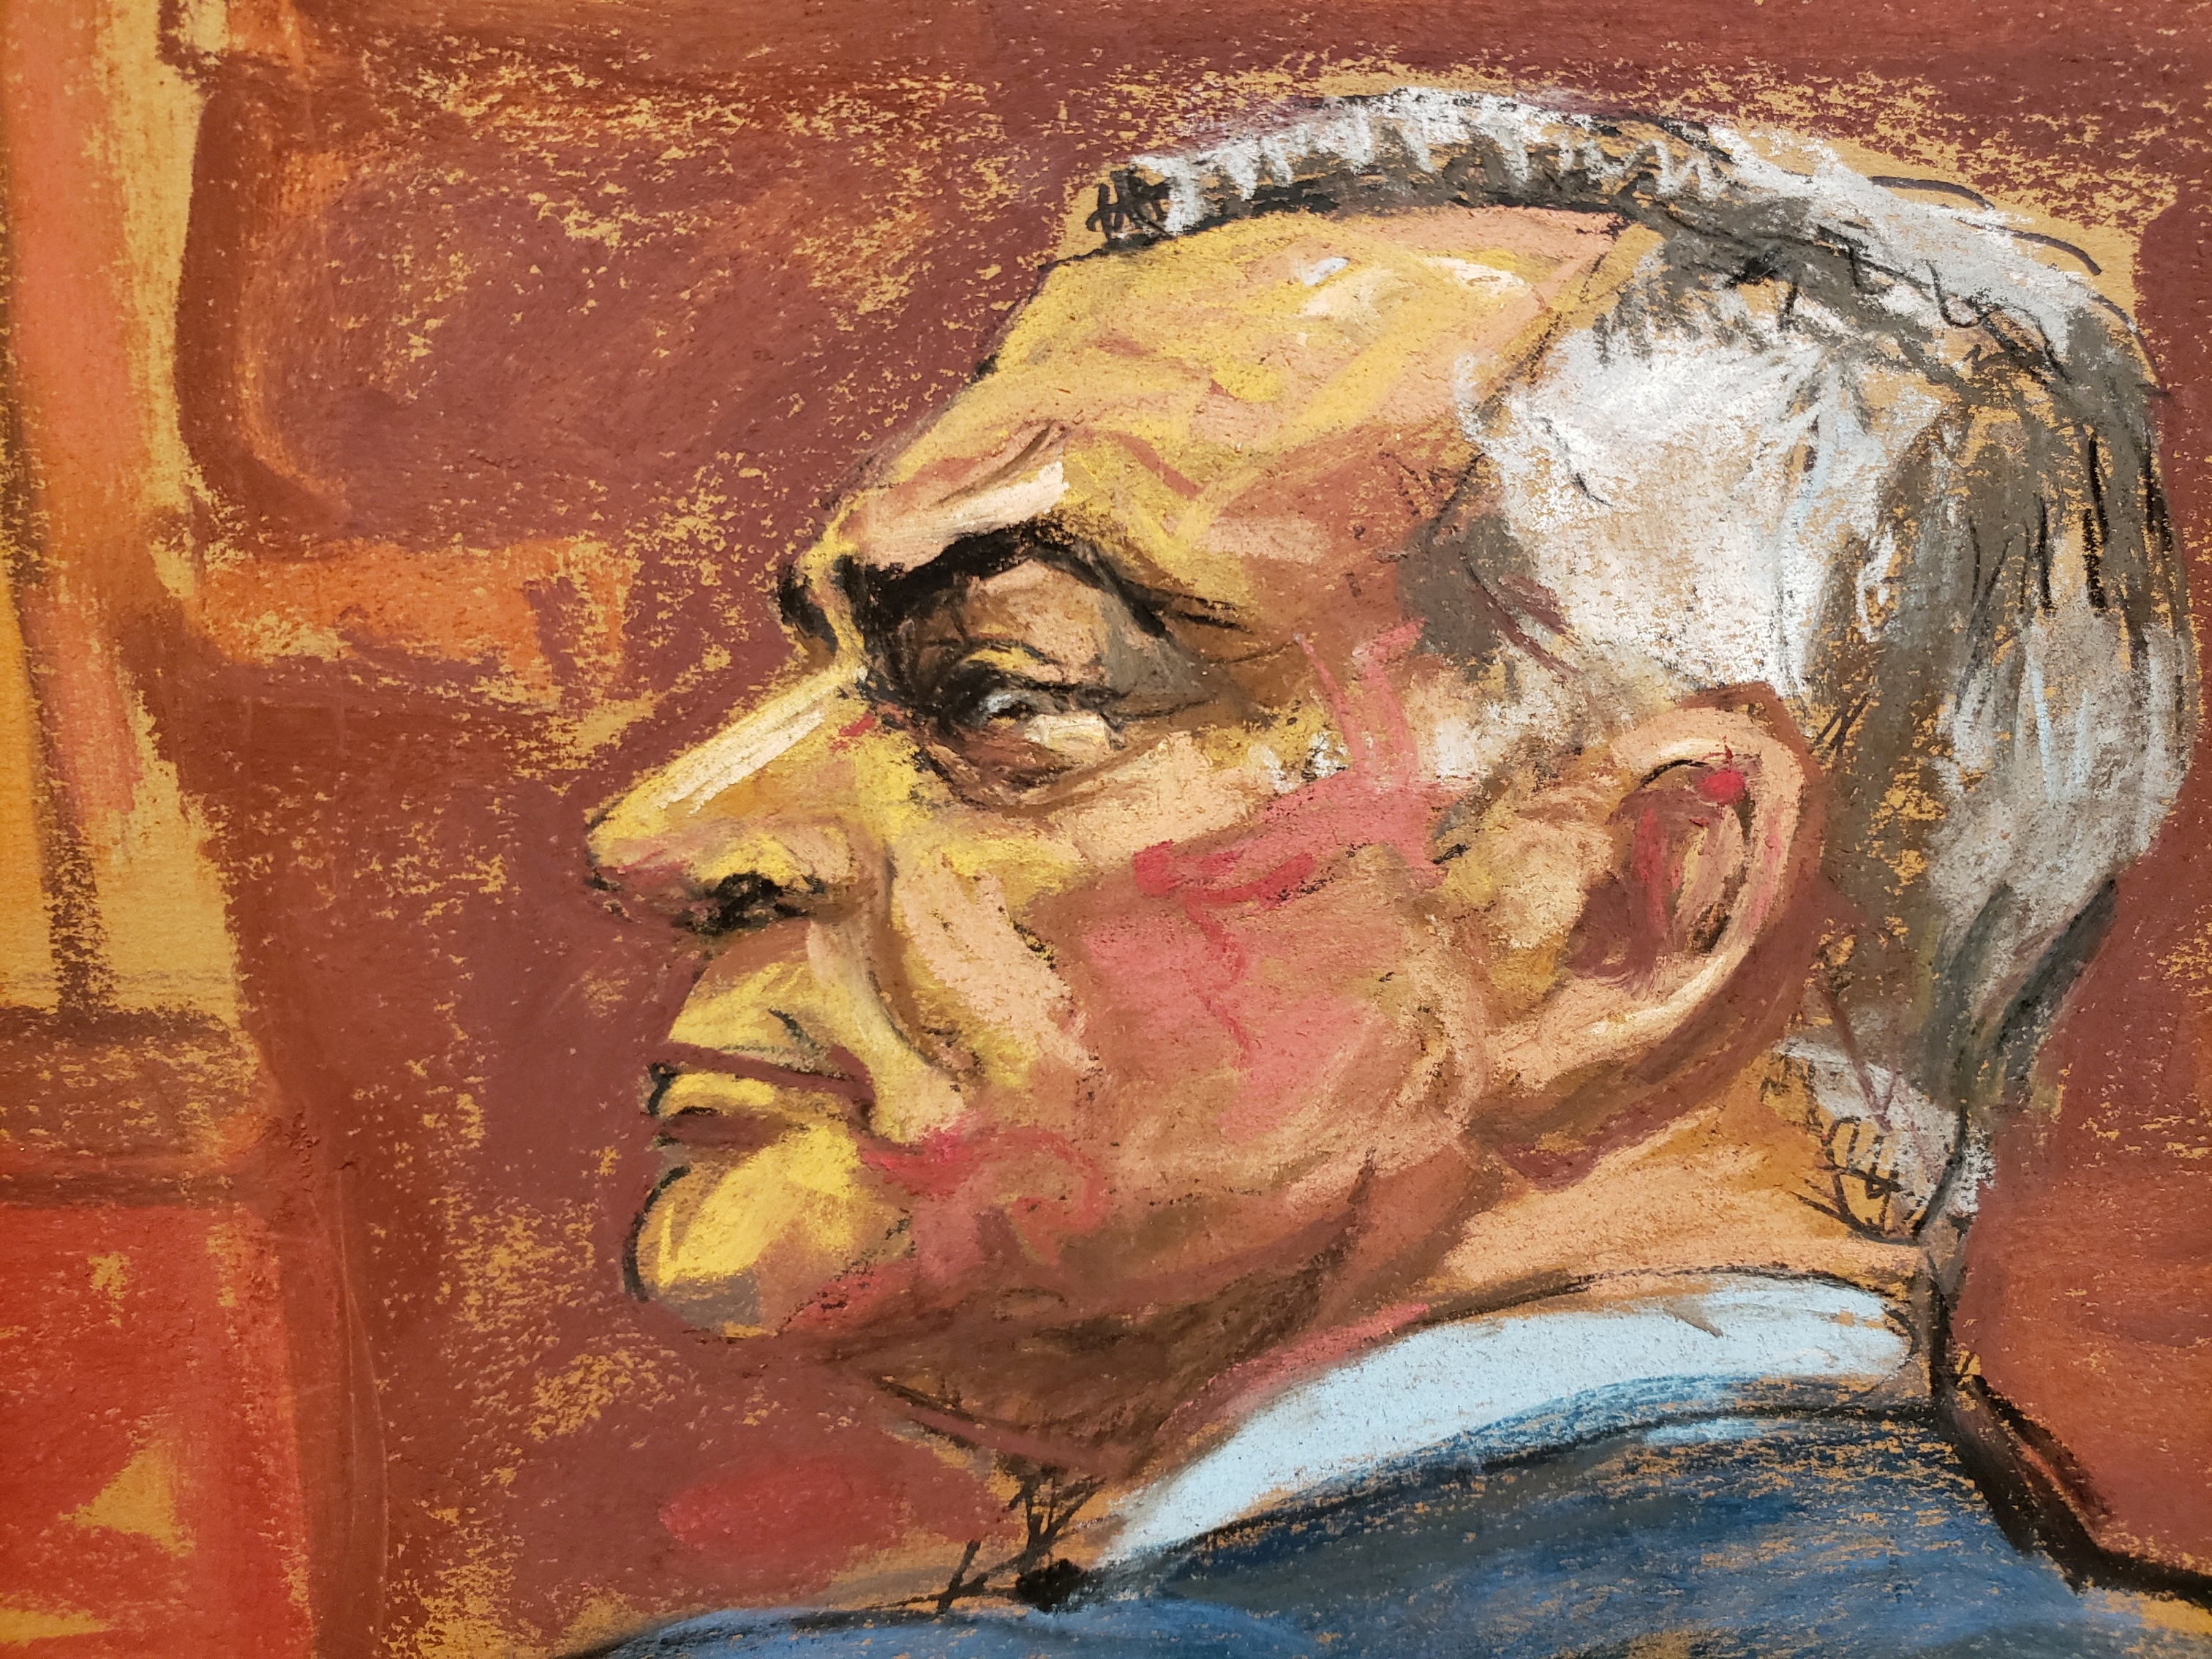 Mexico's former Public Security Minister Genaro Garcia Luna sits during his trial on charges that he accepted millions of dollars to protect the powerful Sinaloa Cartel, once run by imprisoned drug lord Joaquin "El Chapo" Guzman, at a courthouse in New York City, U.S., January 30, 2023 in this courtroom sketch. REUTERS/Jane Rosenberg